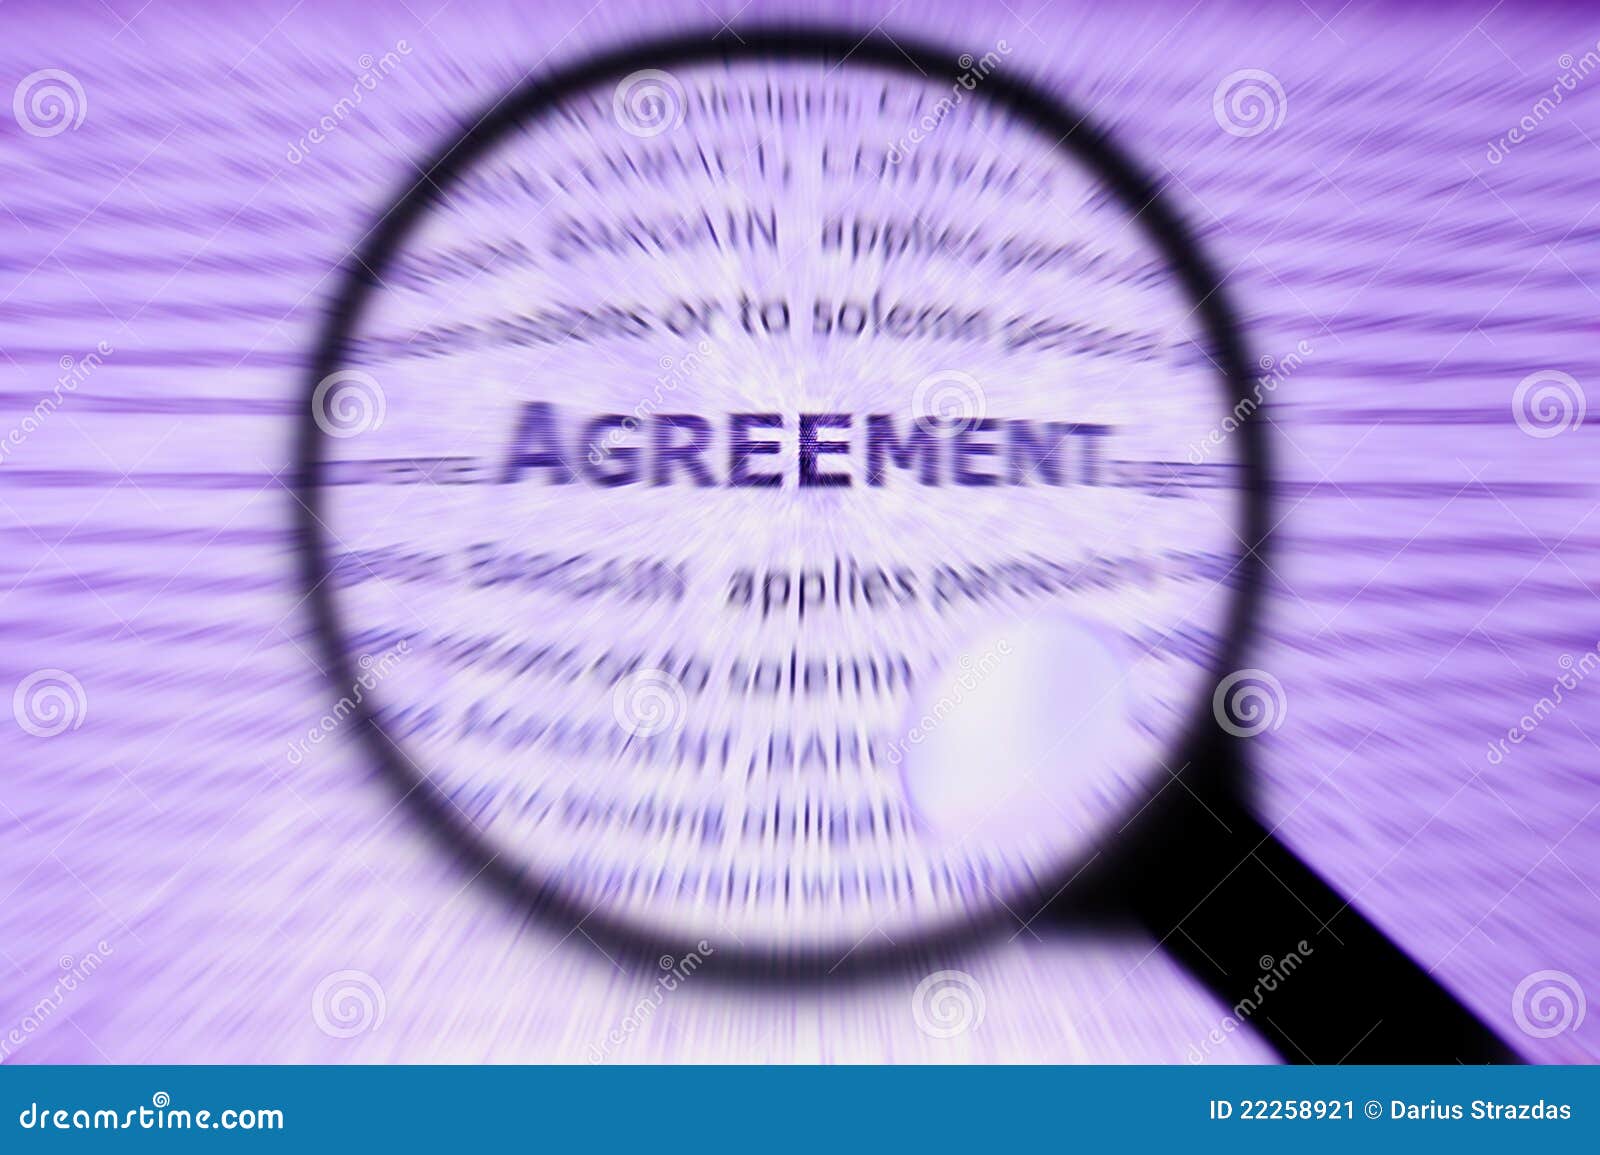 focus or concentrate agreement business concept